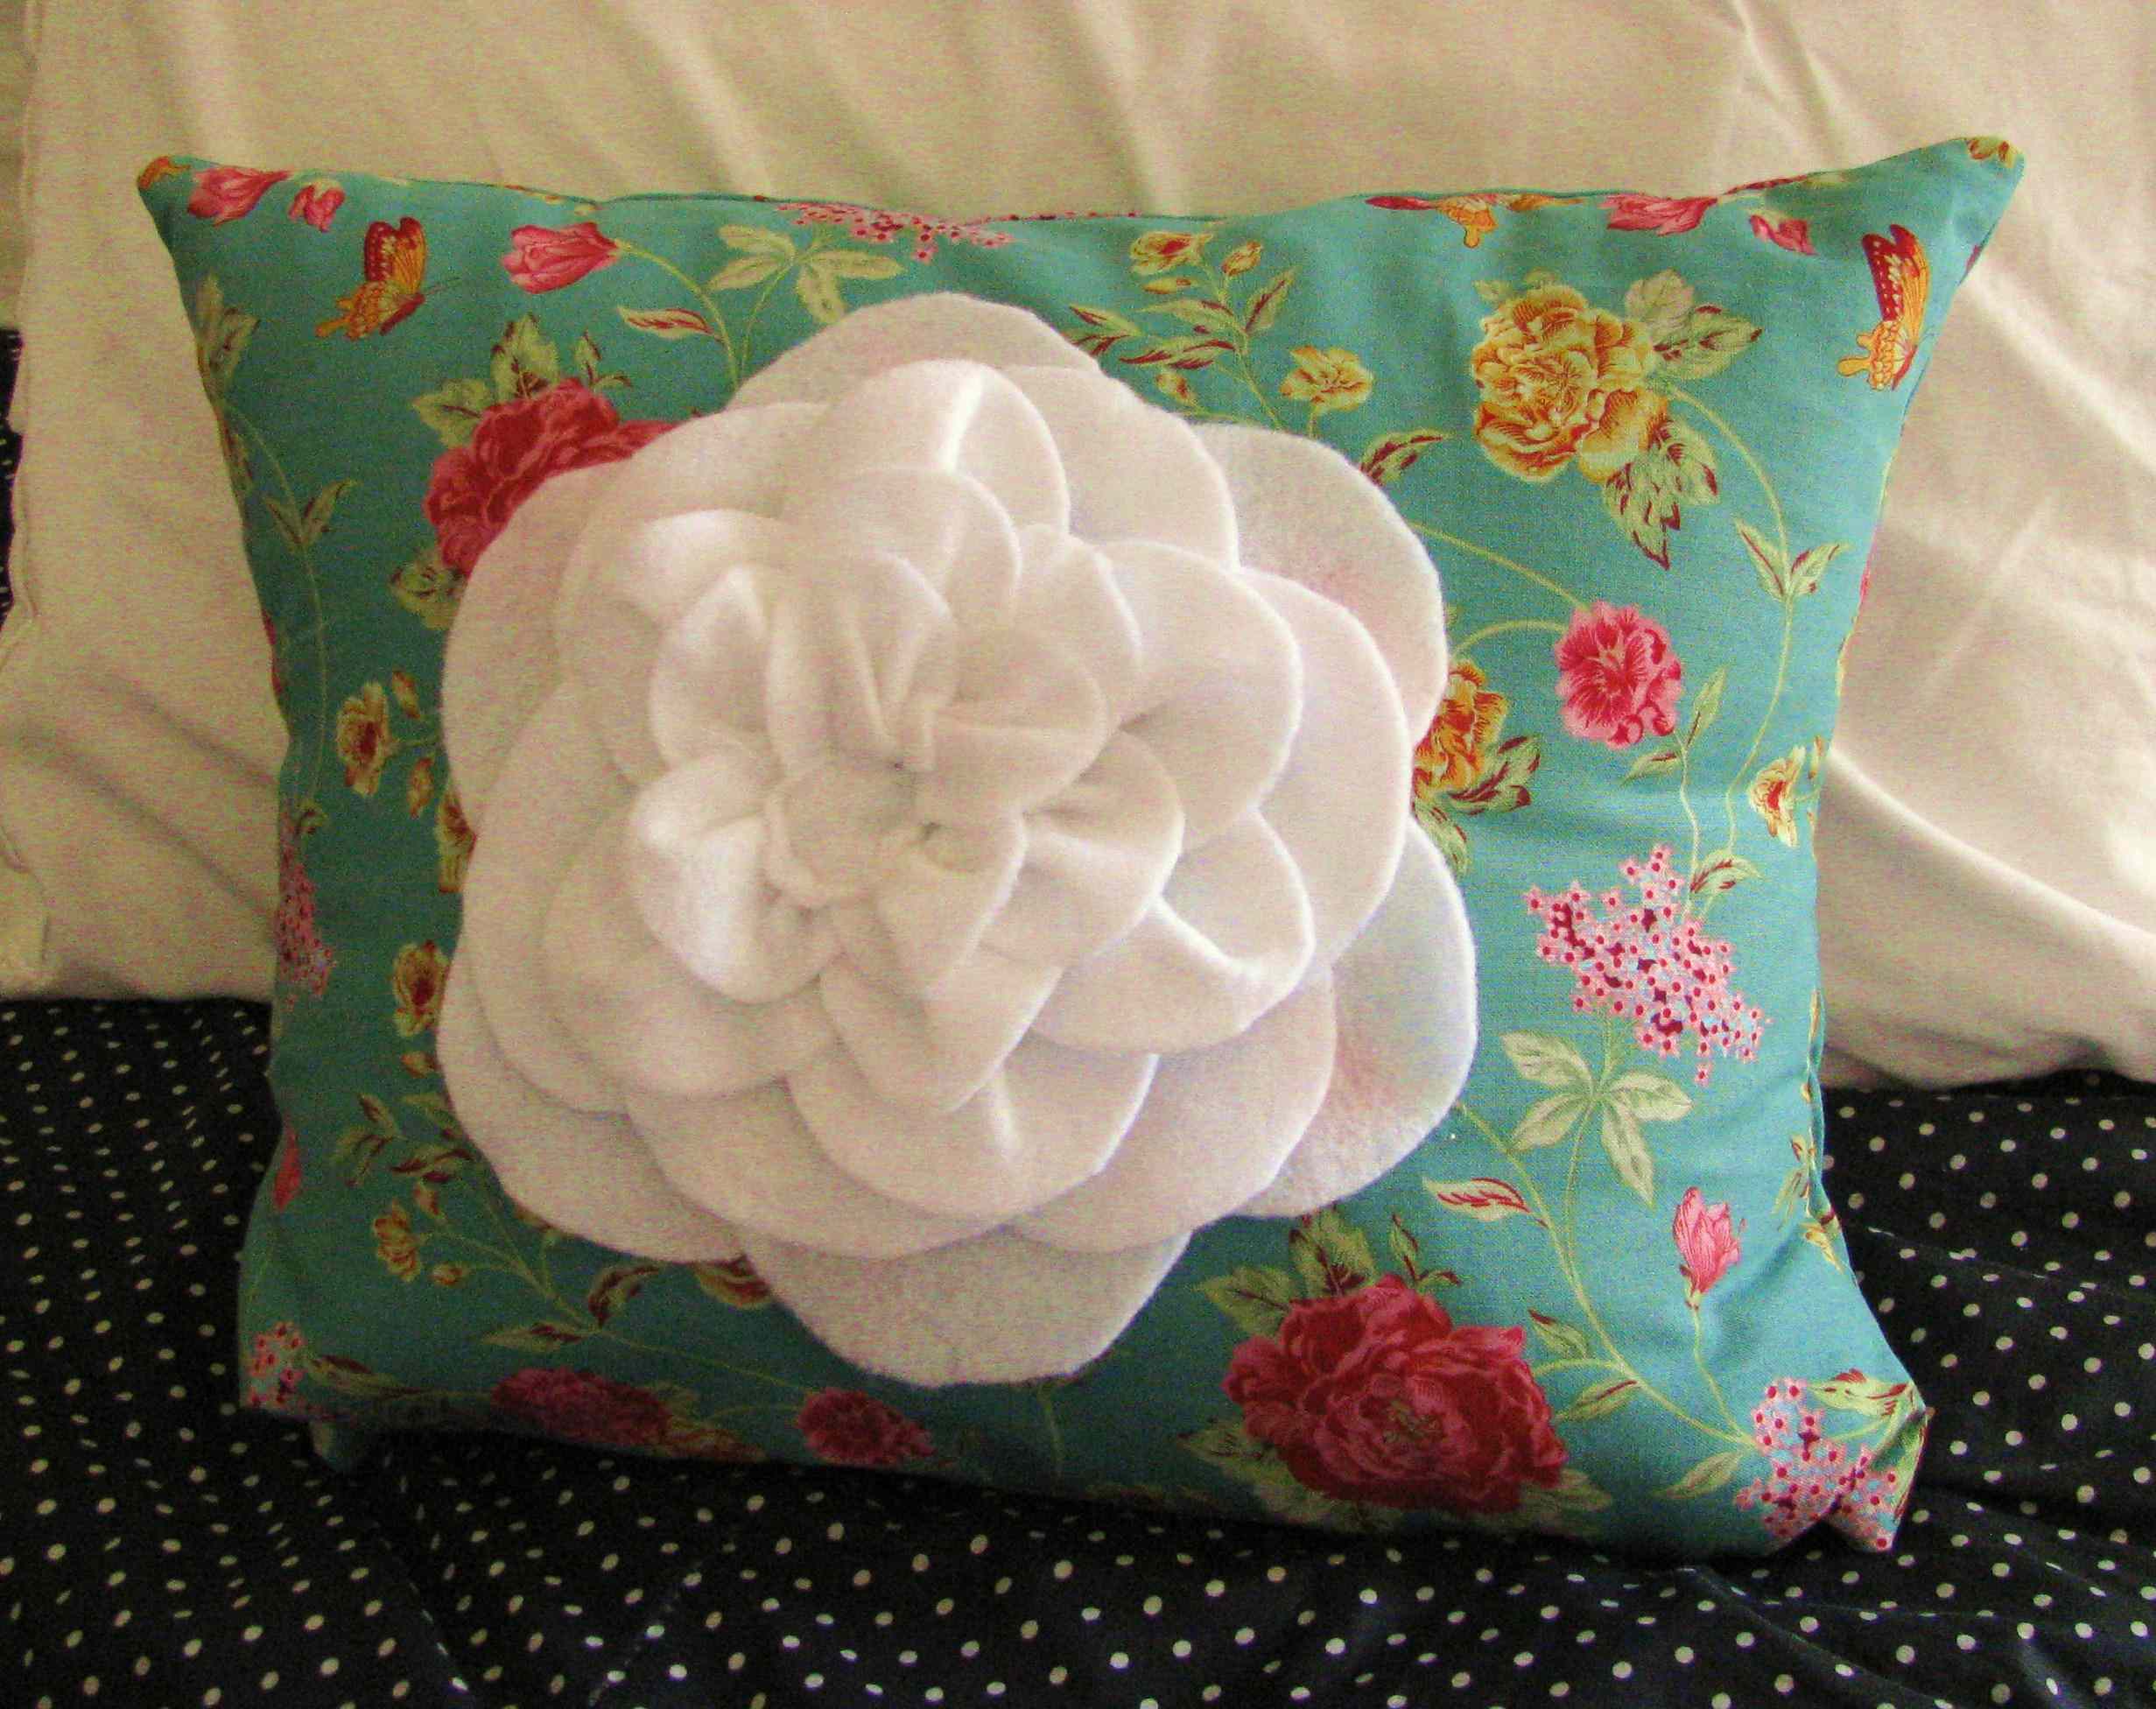 Felt Flower Throw Pillow – Sewing Projects | BurdaStyle.com